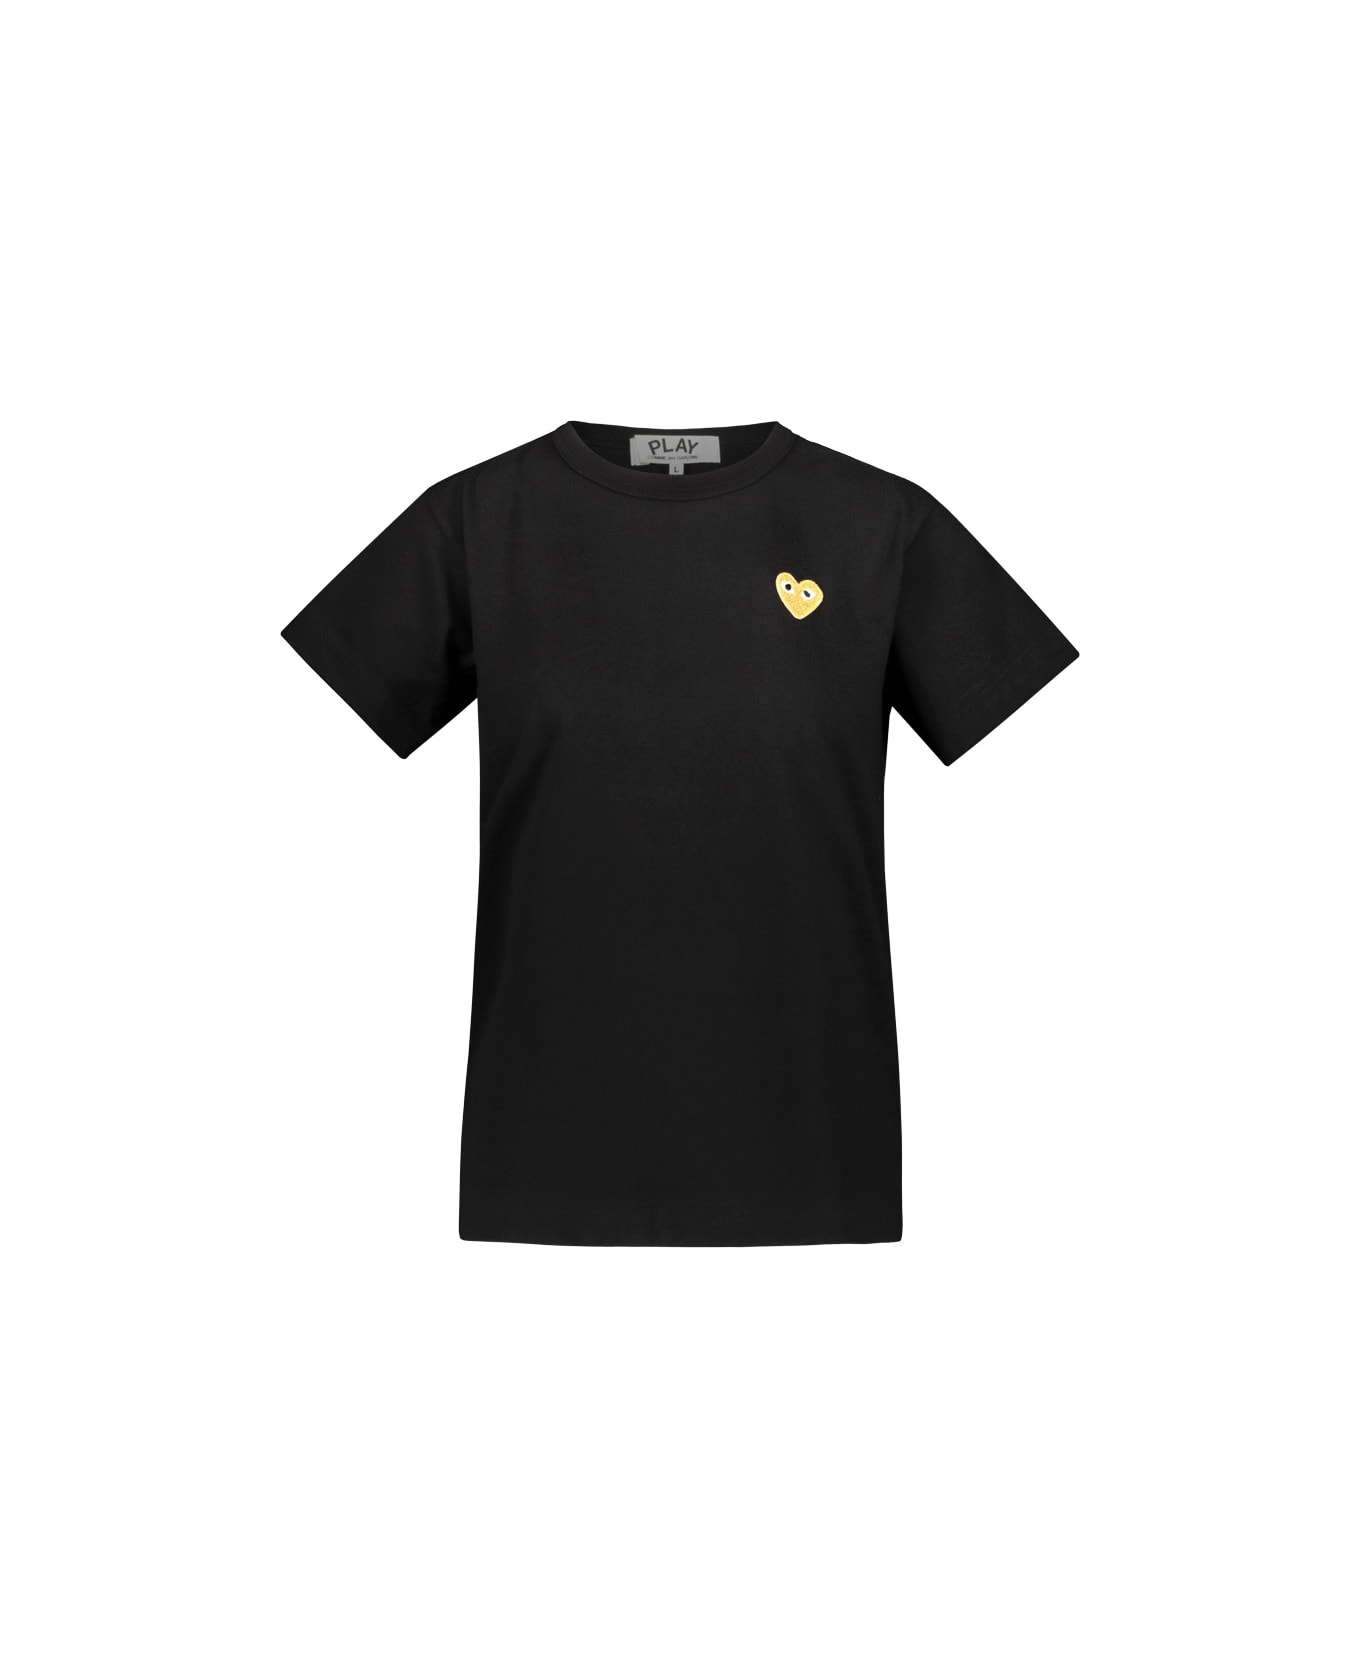 Comme des Garçons Play T-shirt With Gold Heart Embroidery - Blk